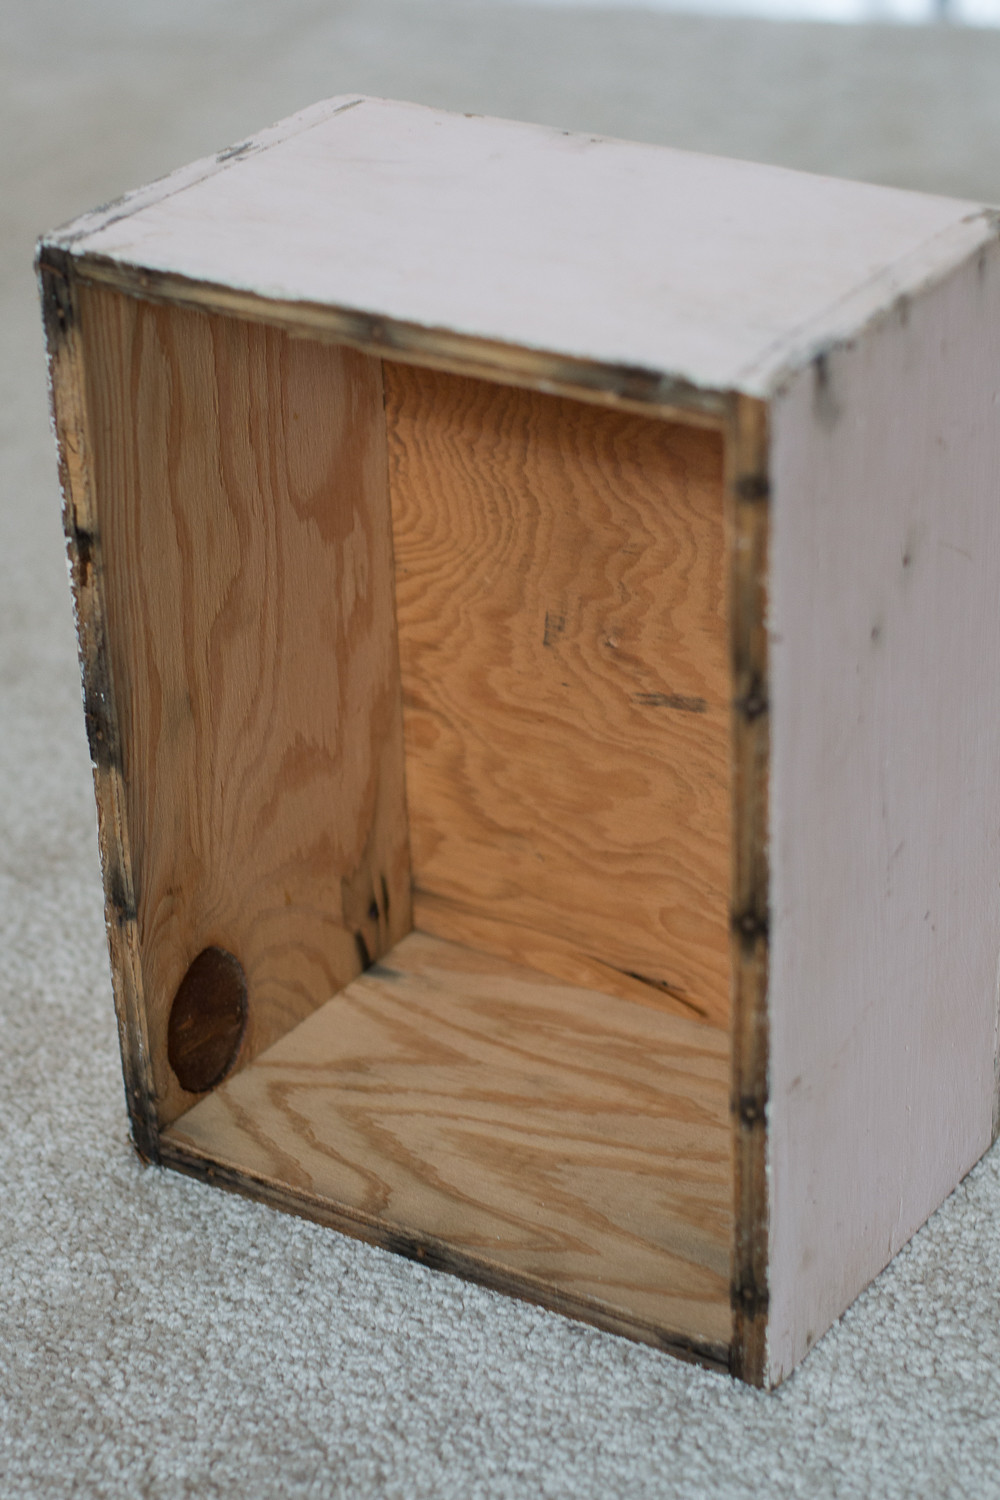 DIY Plywood Box
 DIY Plywood Storage Box for an Open Shelving Storage Solution